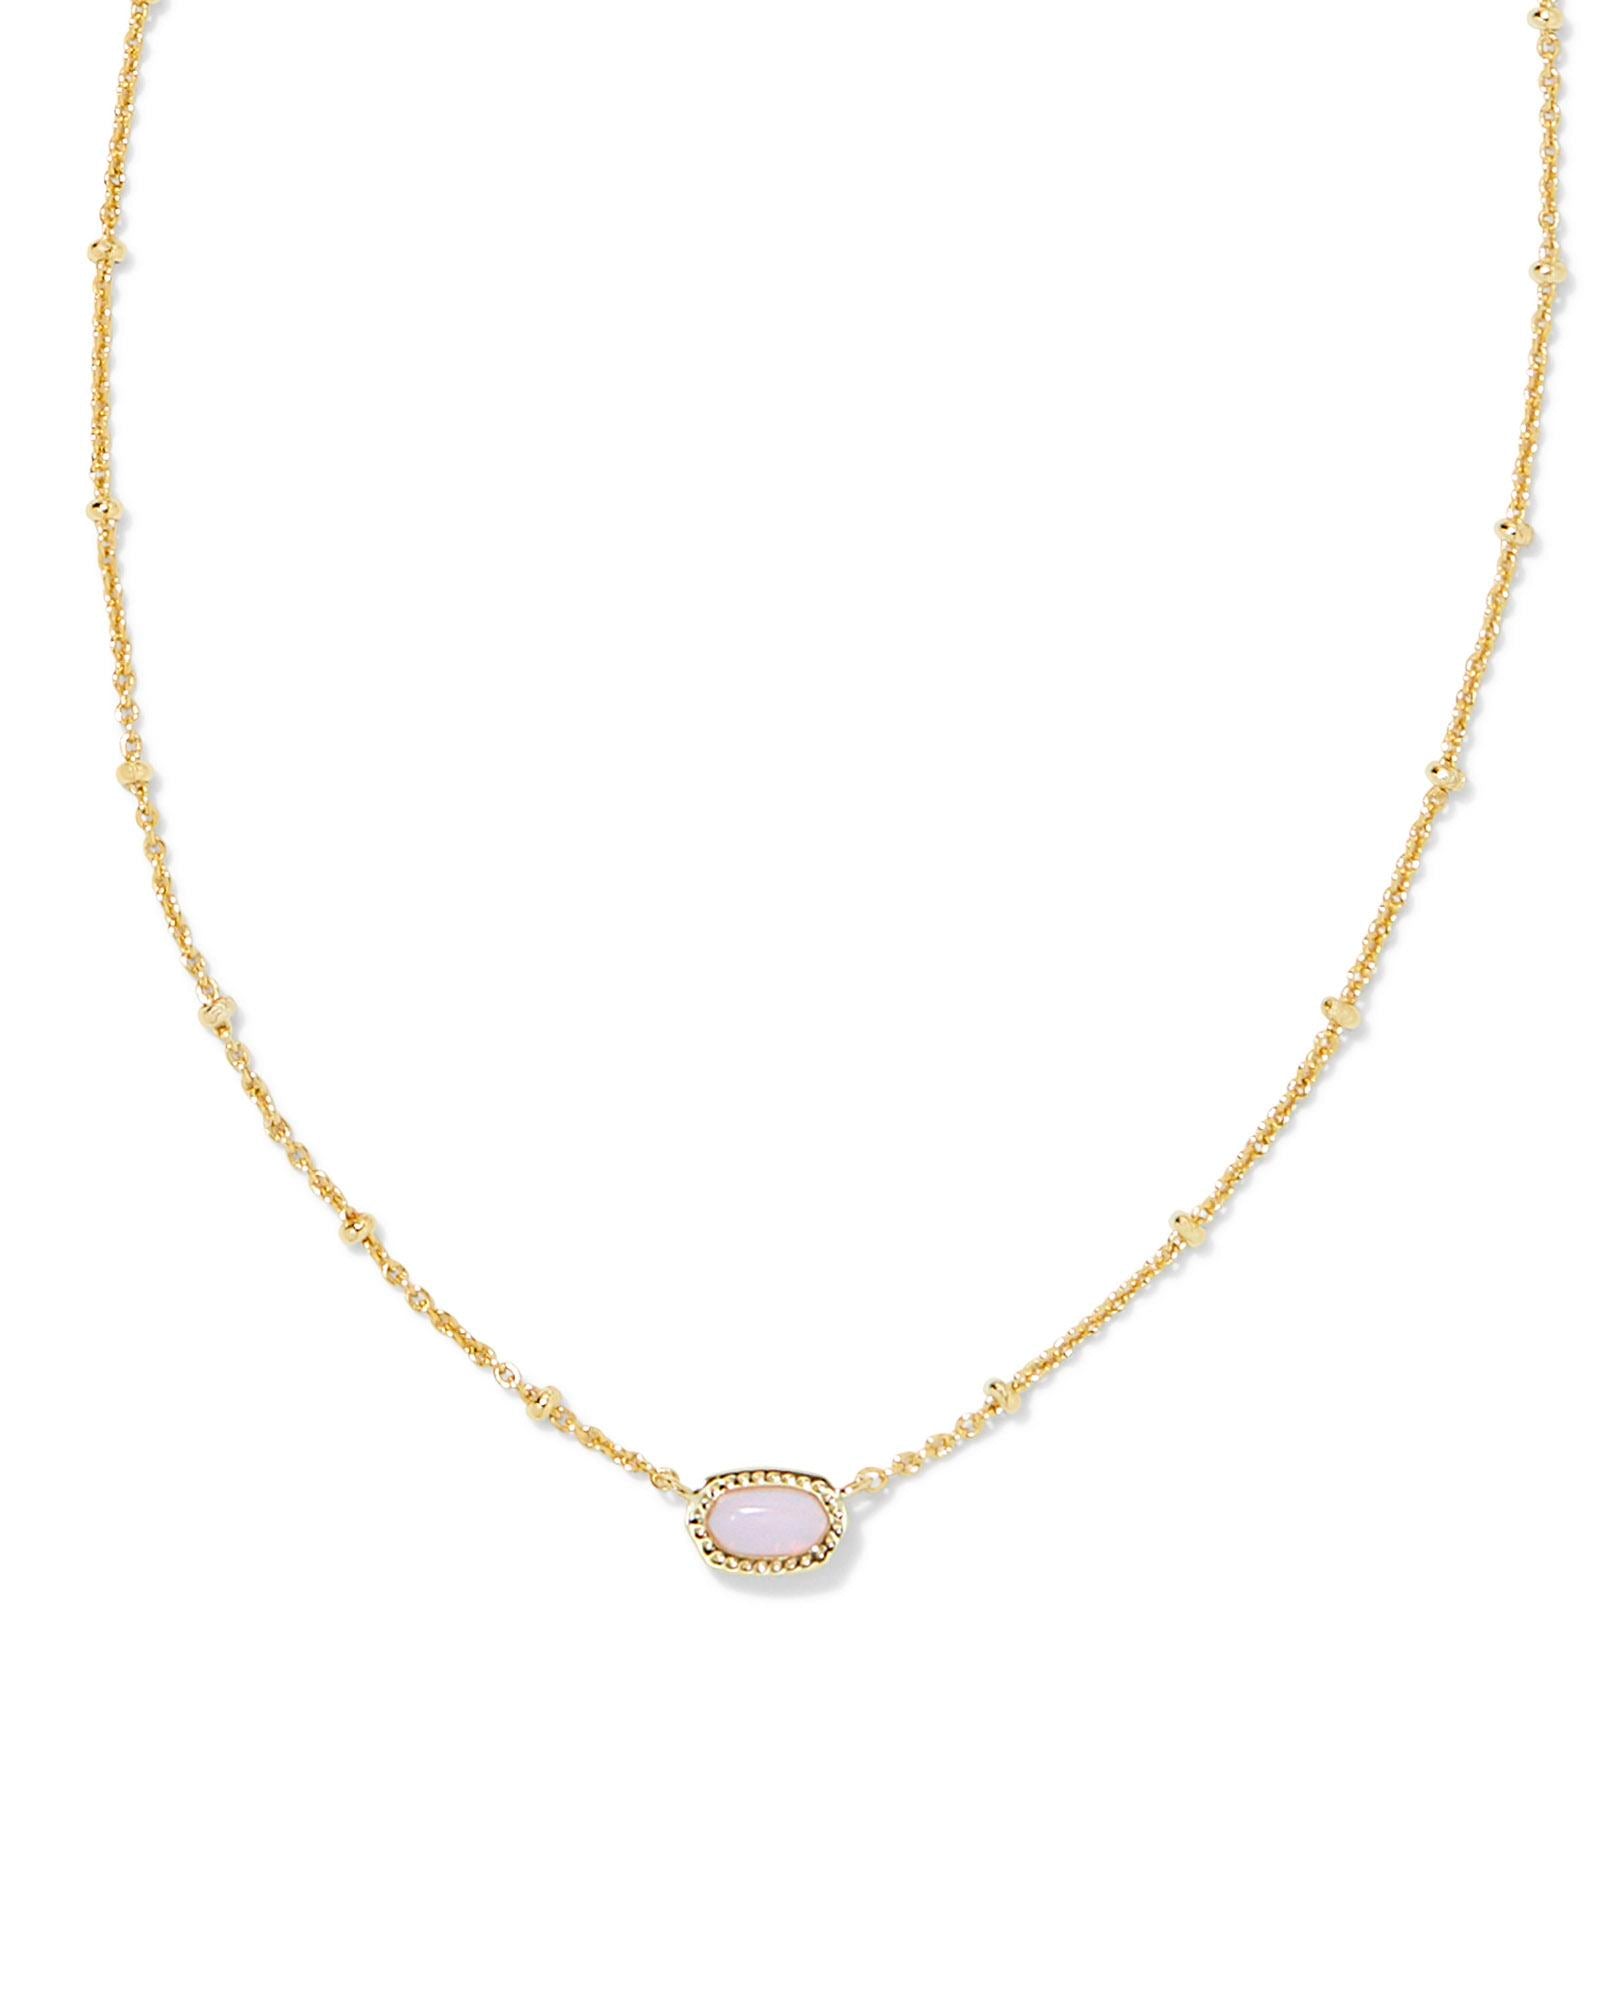 Sorrelli | Audrianna Crystal Tennis Necklace in Bright Gold Tone and F